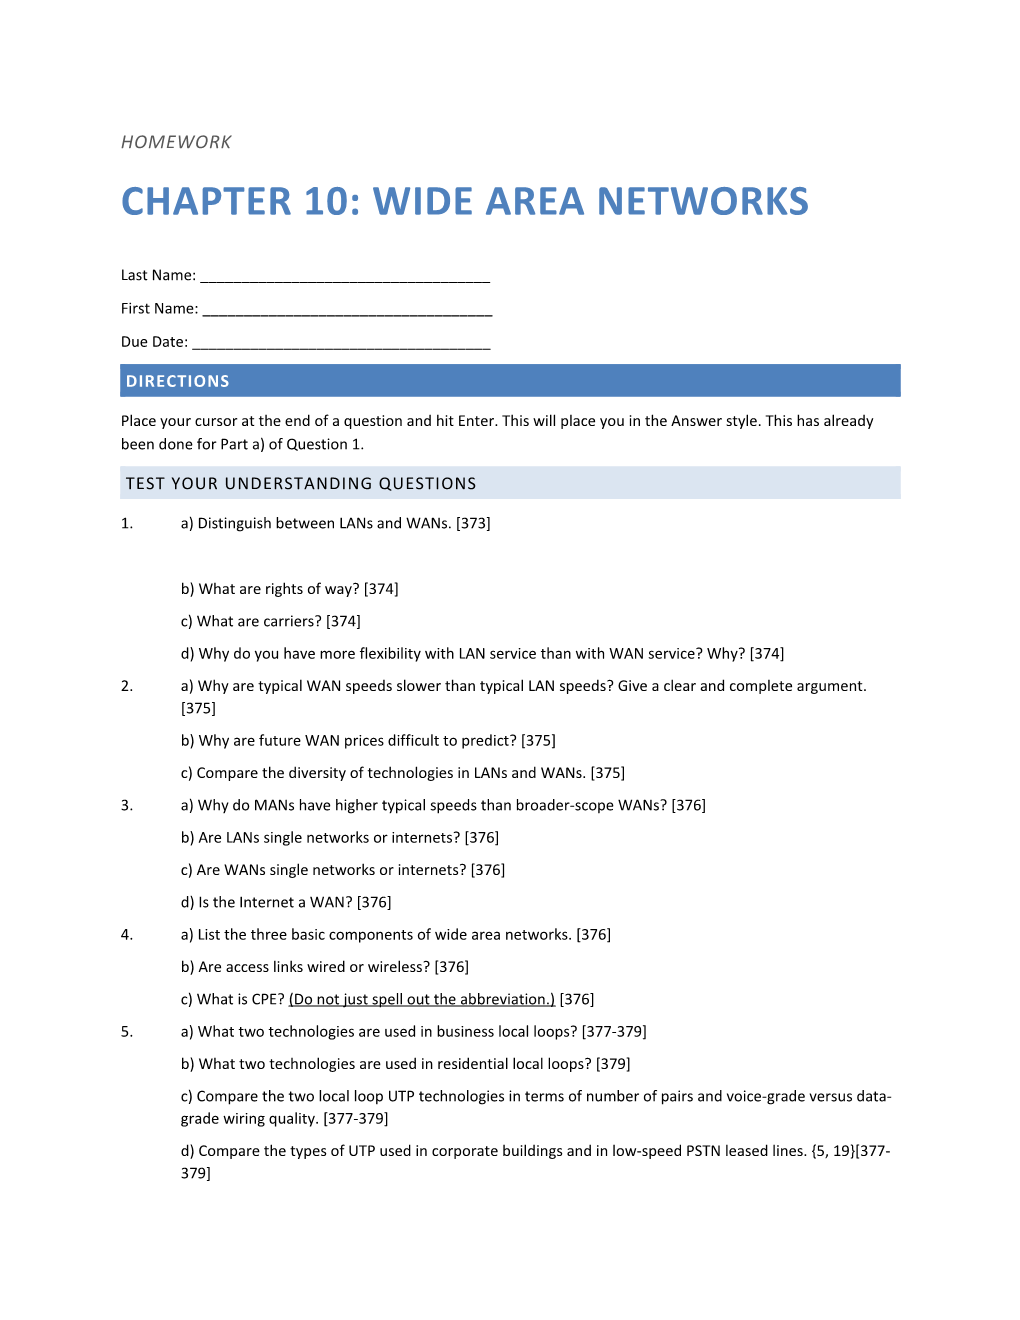 Chapter 10: Wide Area Networks